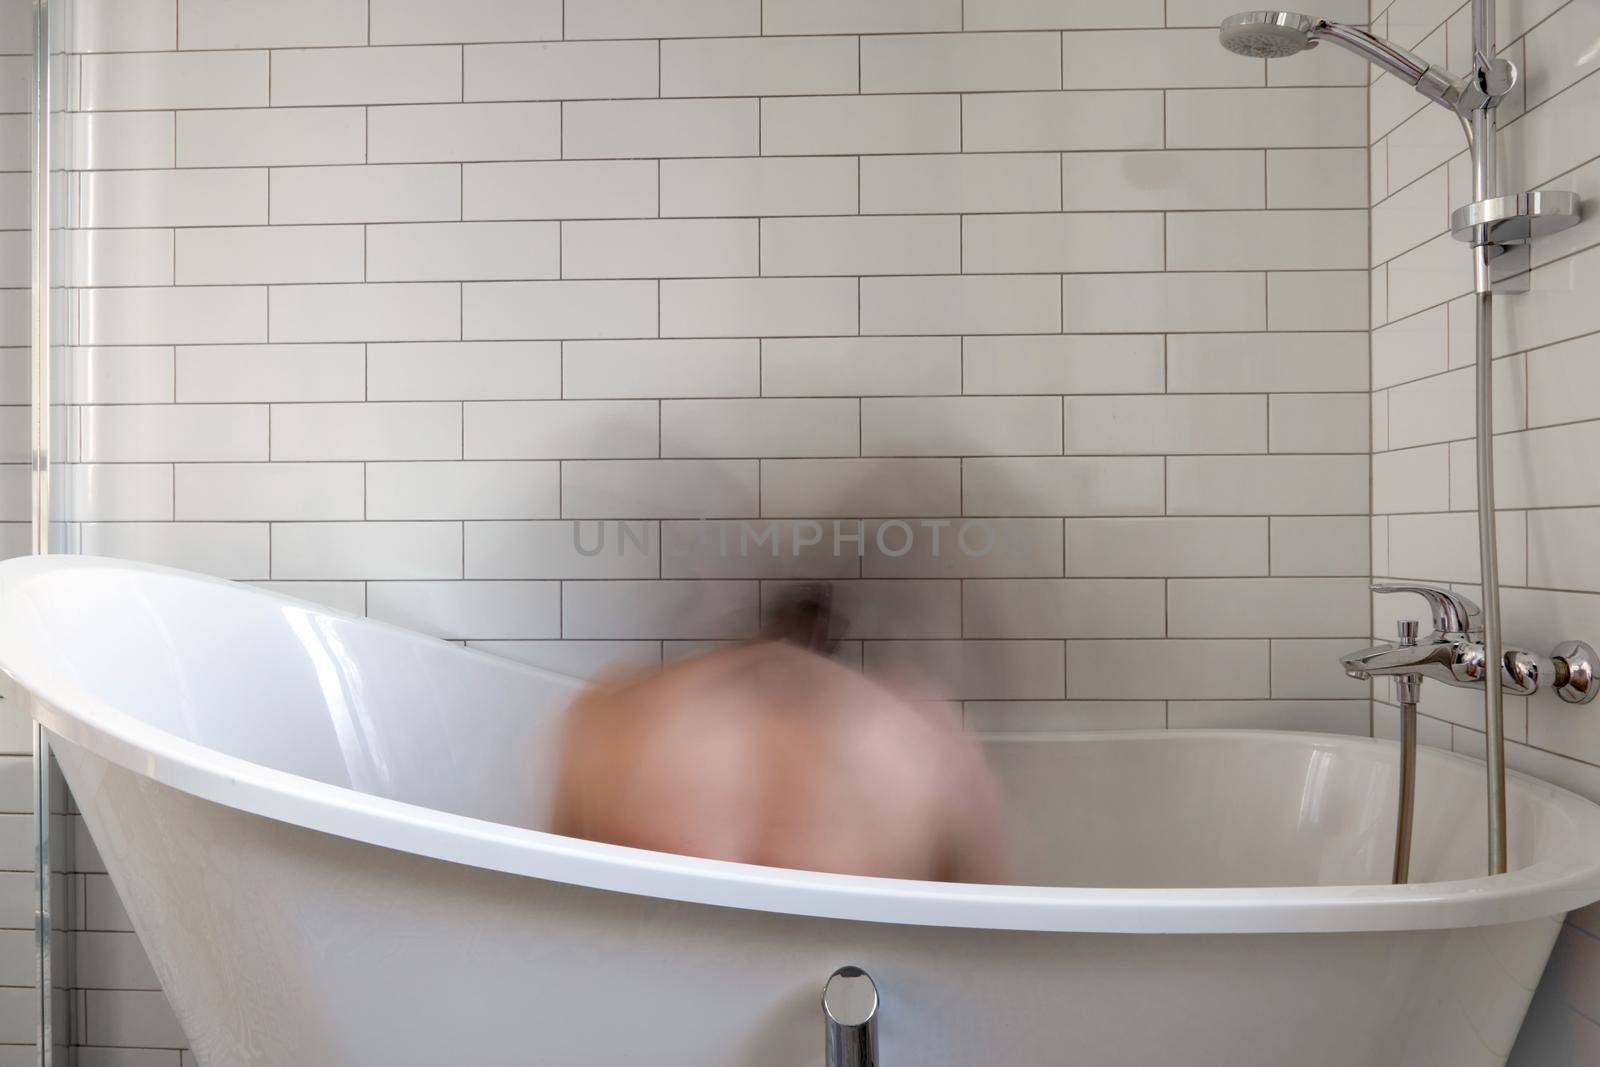 Unrecognizable person feels bad and shows mental problems while sitting in the bathroom. Blurred man lonely in white space